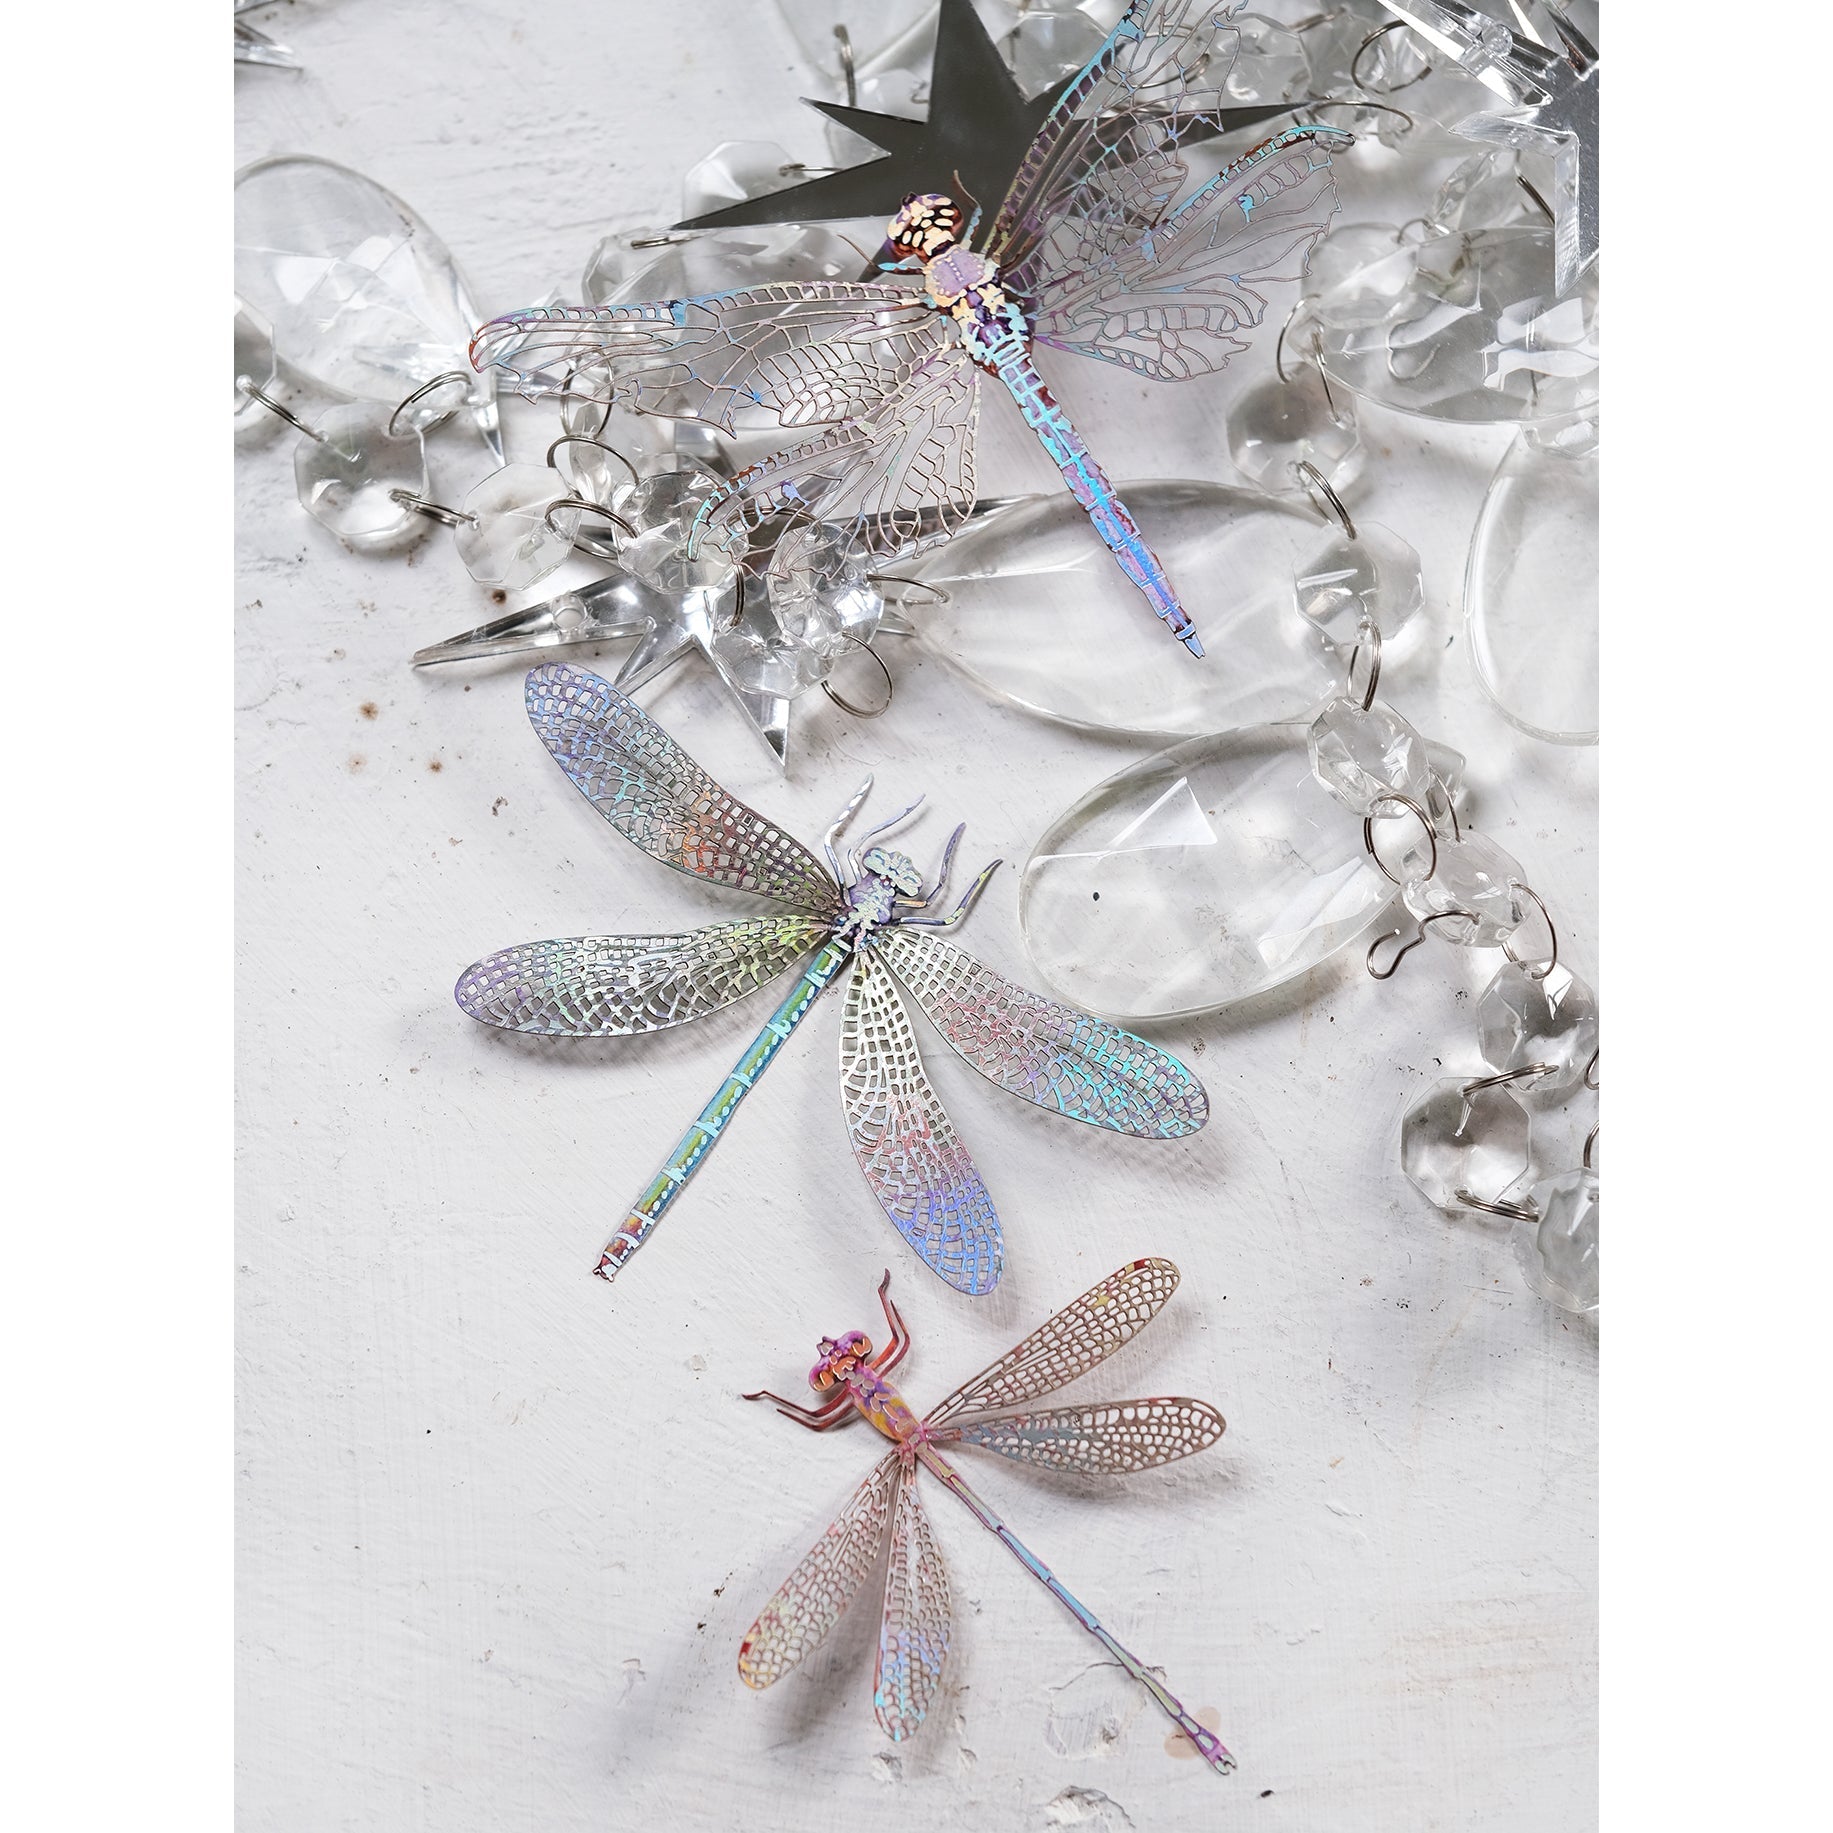 Celestial Beings Dragonfly Set - Artist Discount